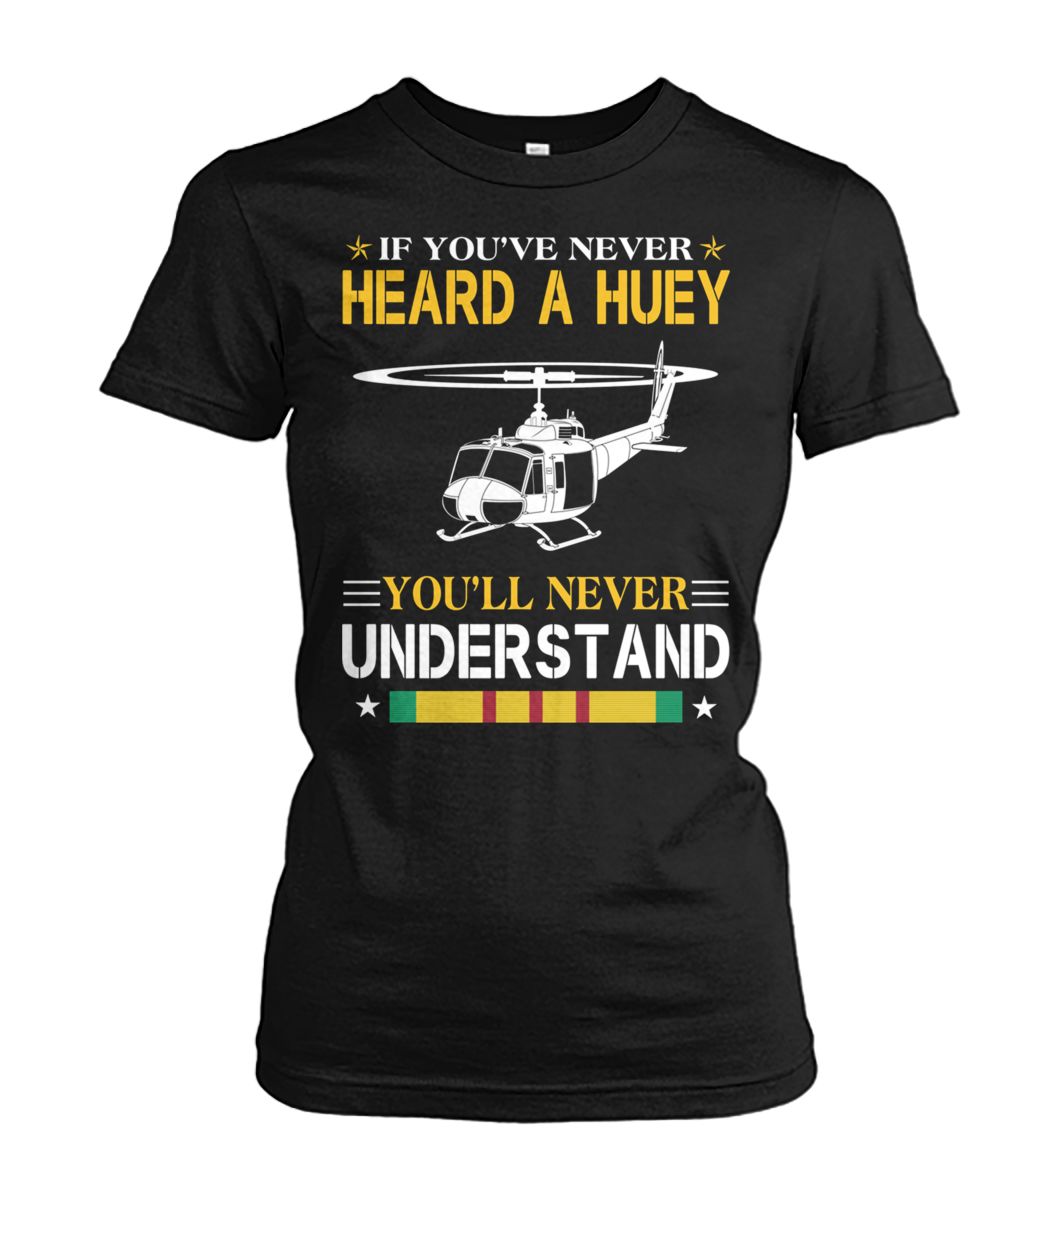 Air force if you've never heard a huey you'll never understand women's crew tee